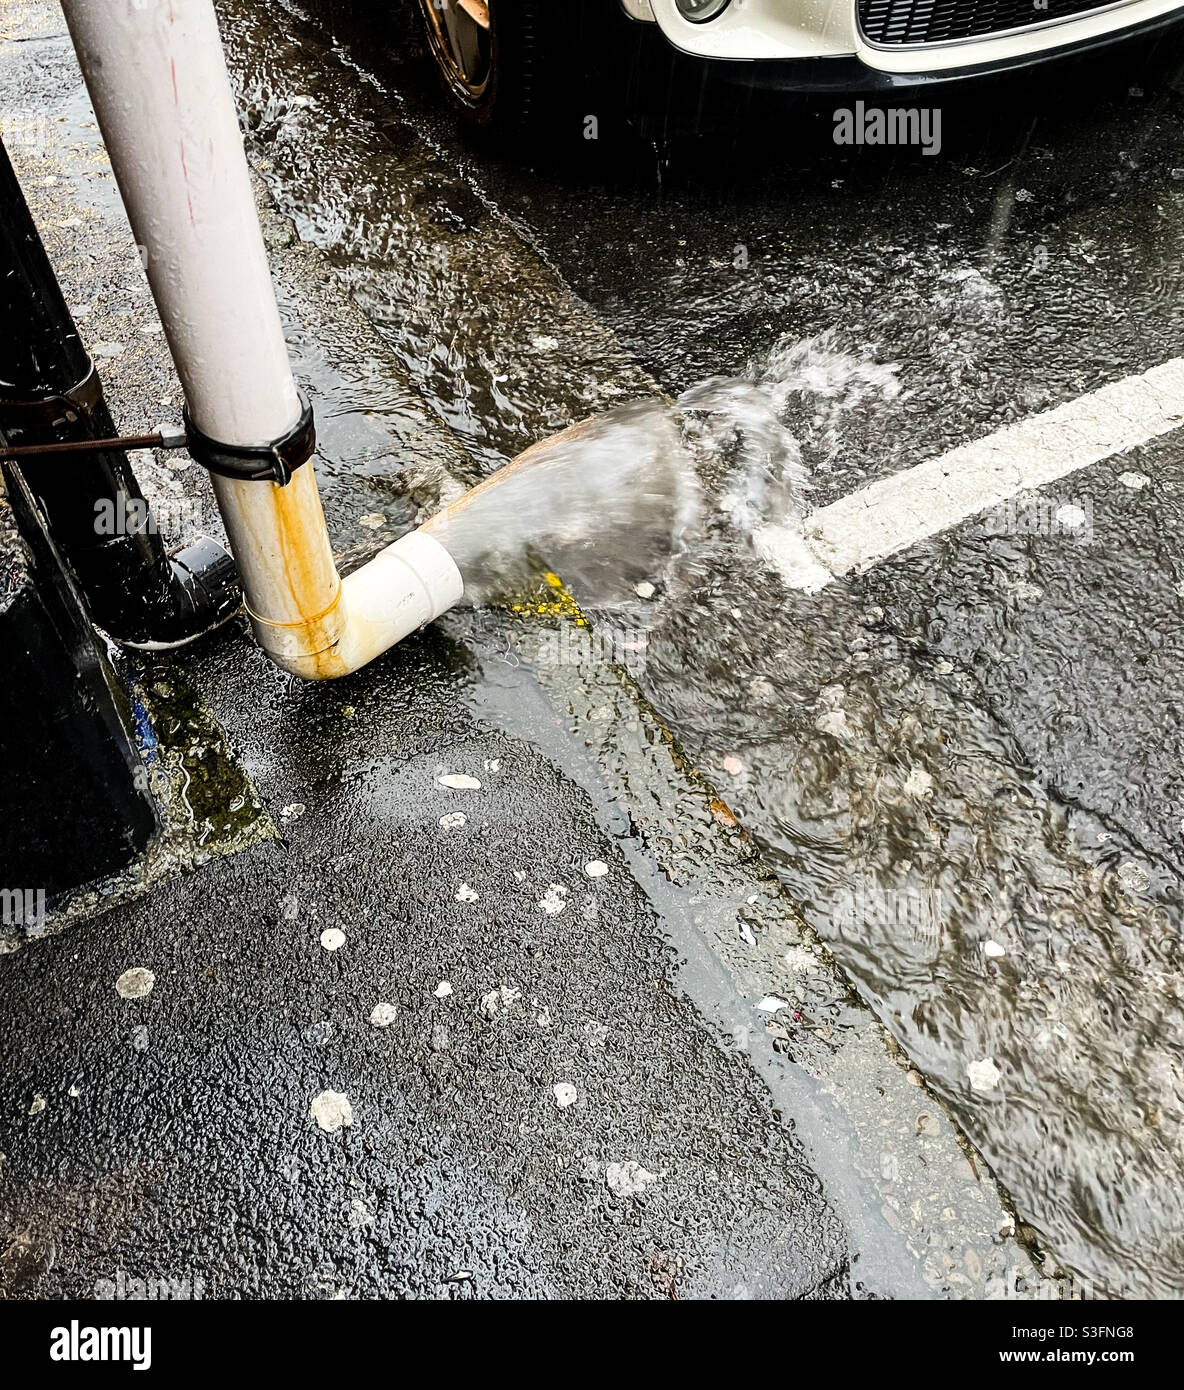 Rainwater spills from a drainpipe into the gutter in Cuba Street Wellington New Zealand during a storm Stock Photo